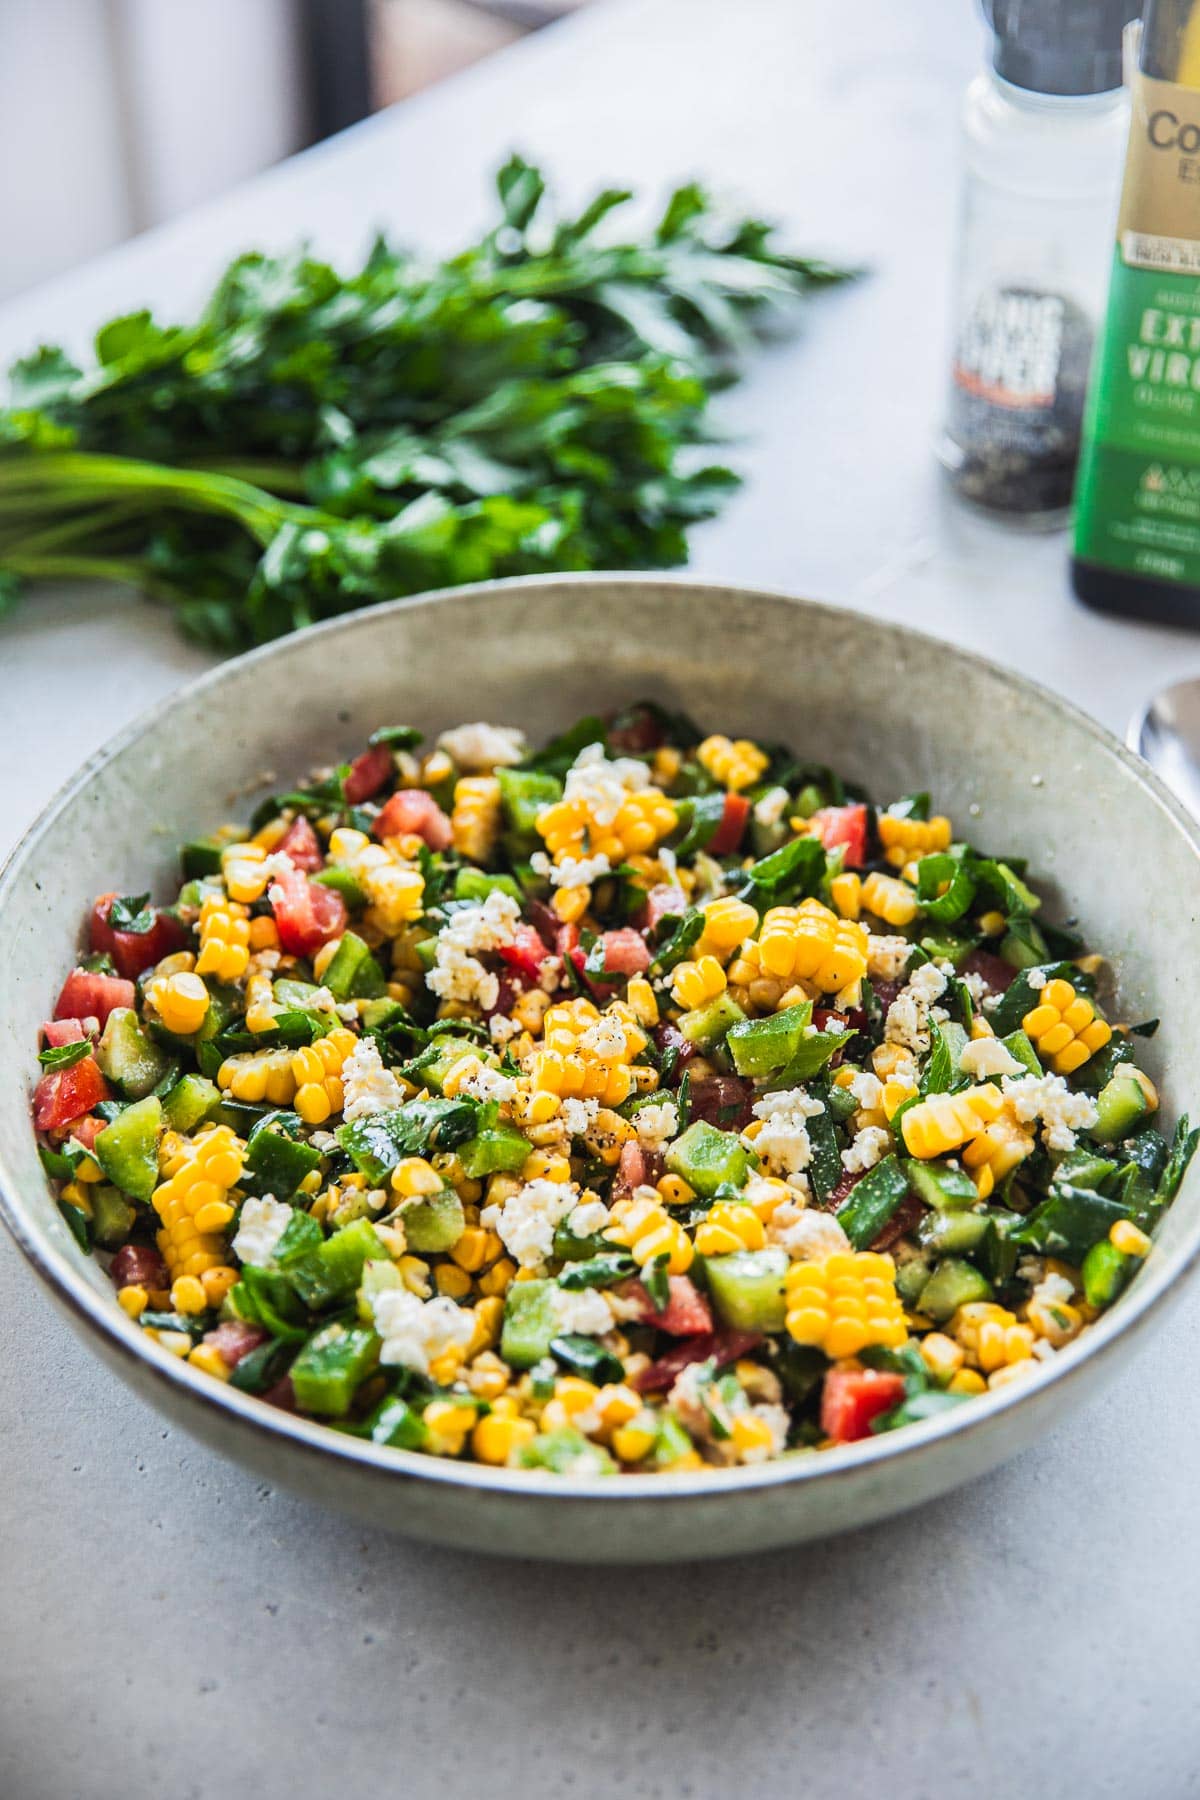 Feta Corn Salad in a bowl on the table with a parsley bunch and olive oil bottle.